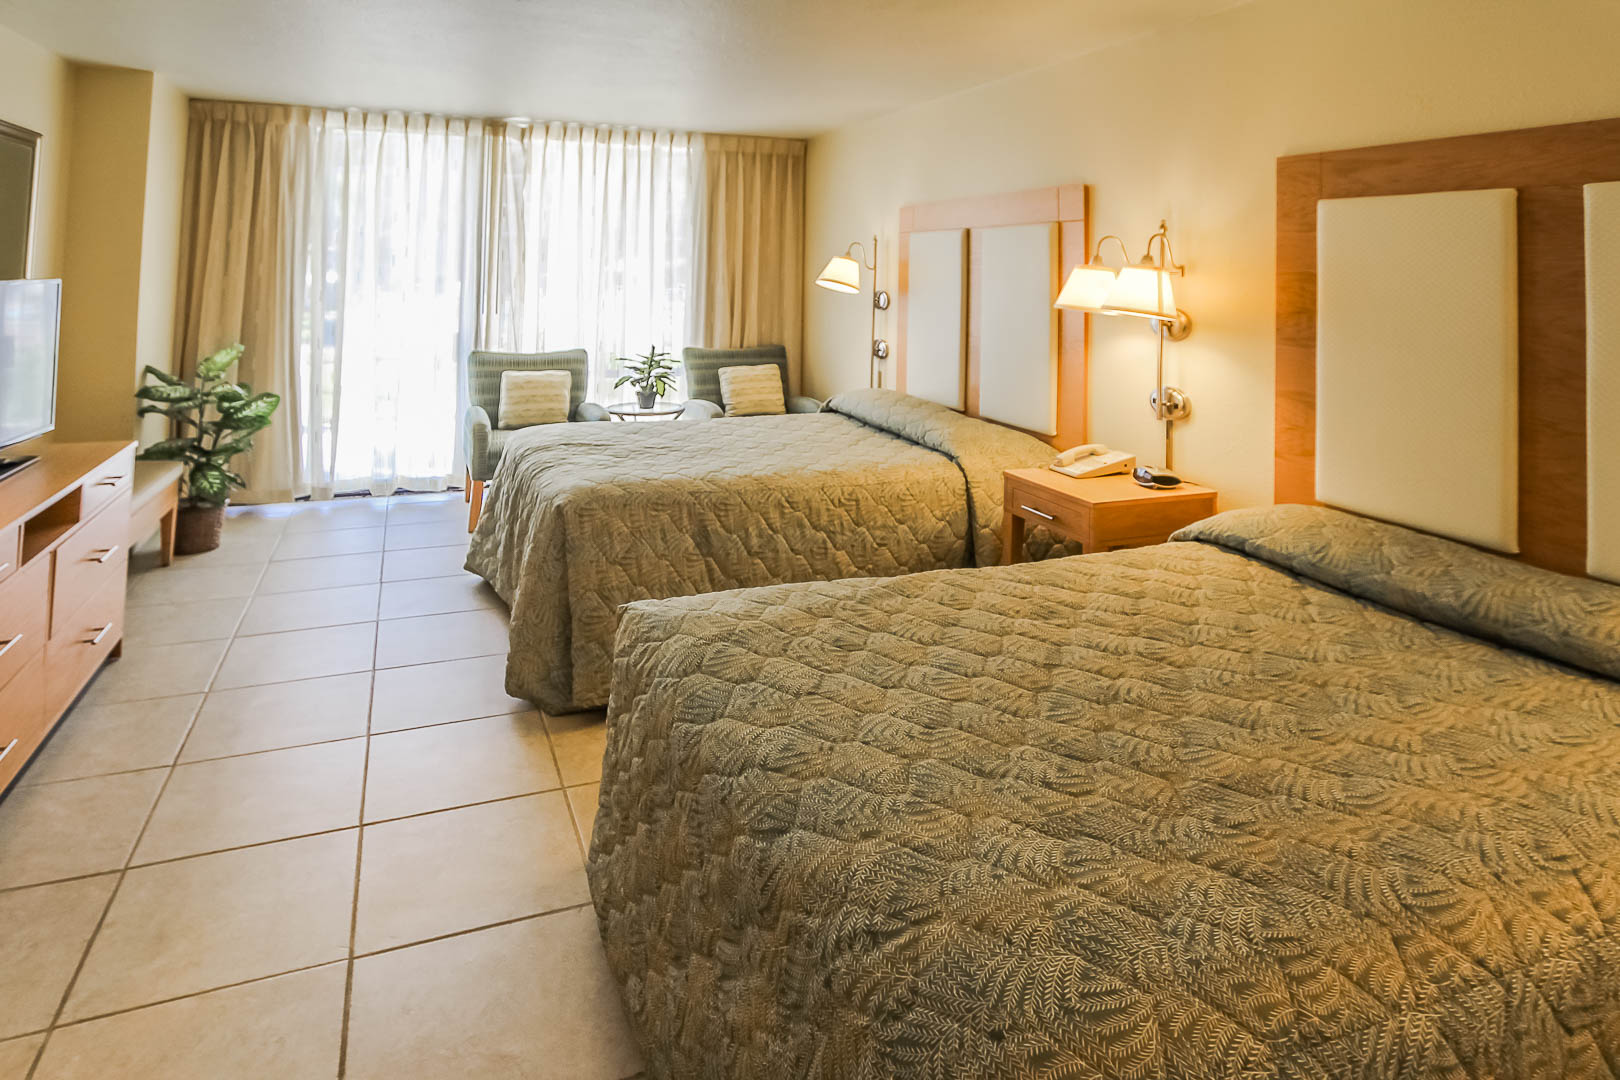 A spacious two bedroom with double beds at VRI's Royale Beach Tennis Club in Texas.